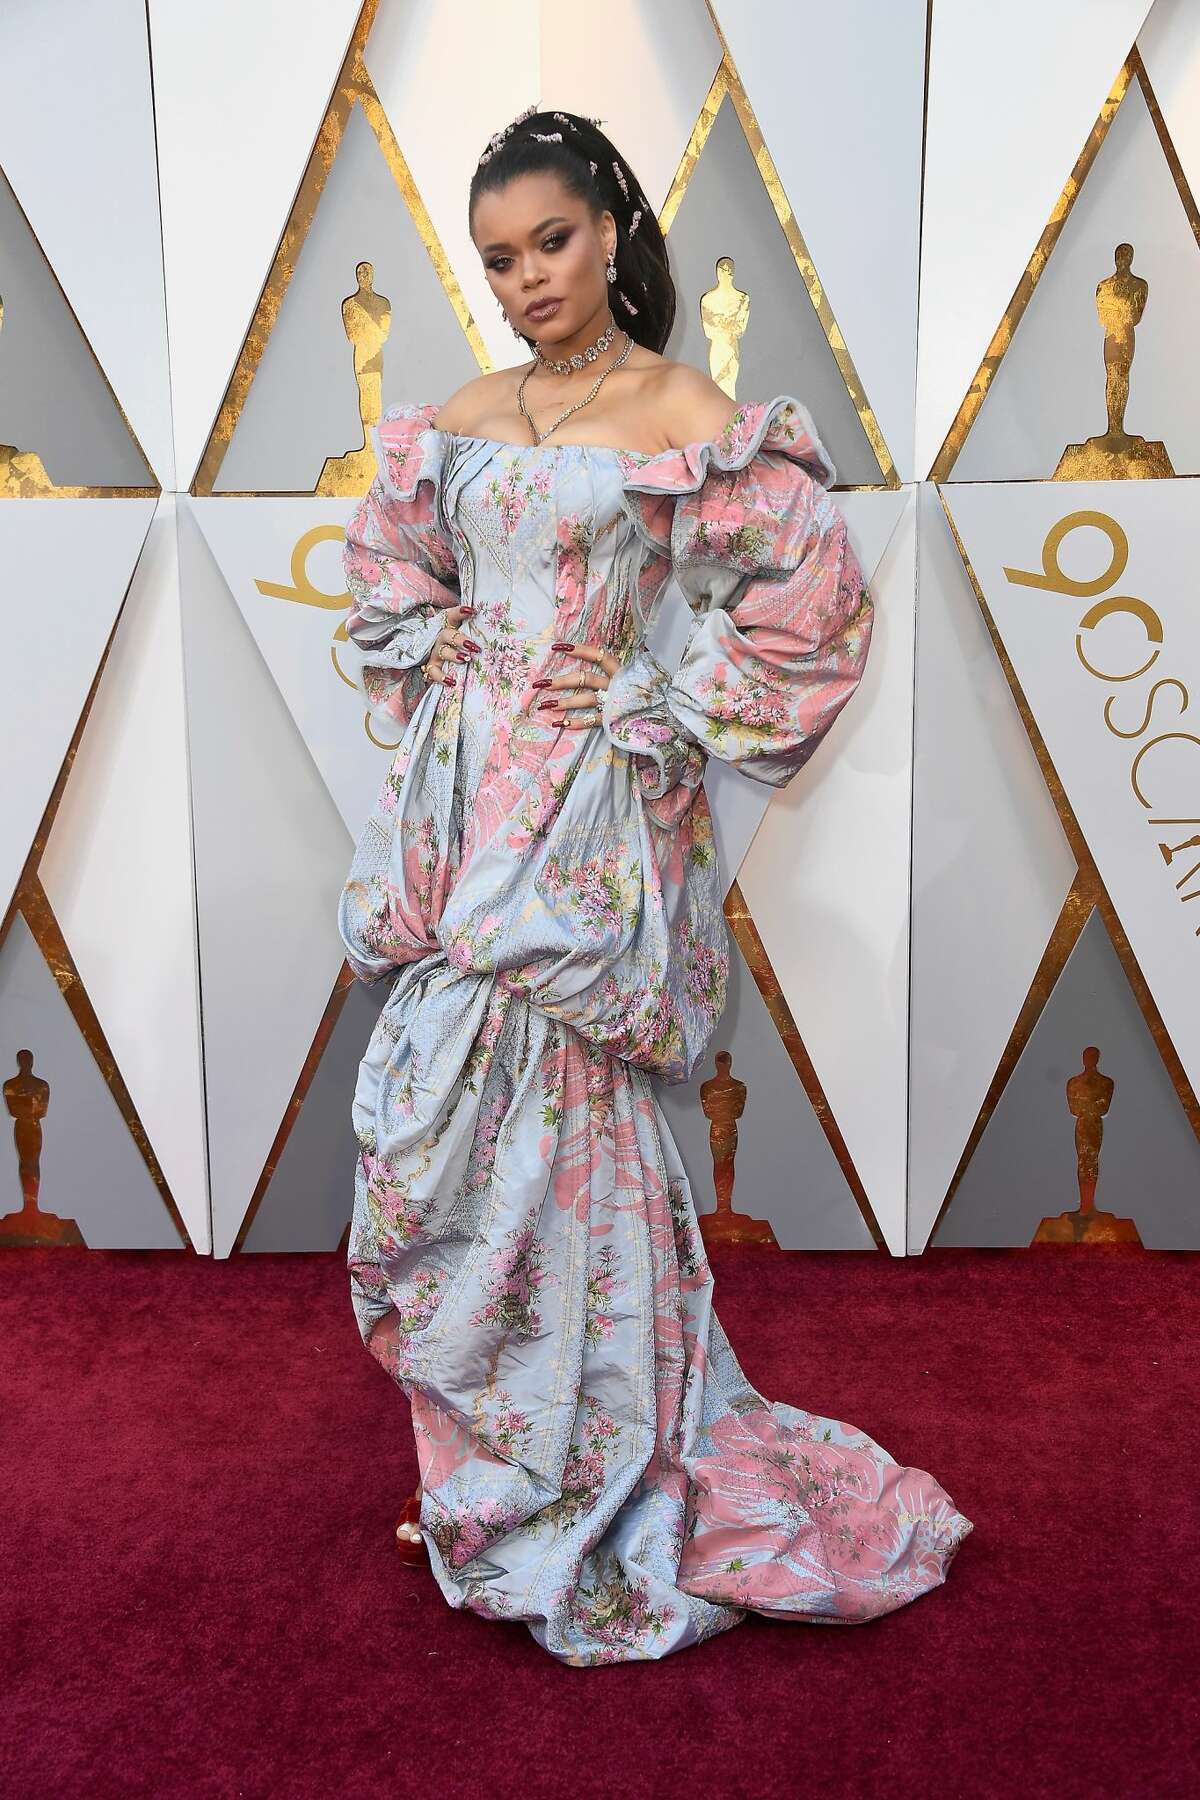 Worst: Andra Day, why are you wearing a bedspread?